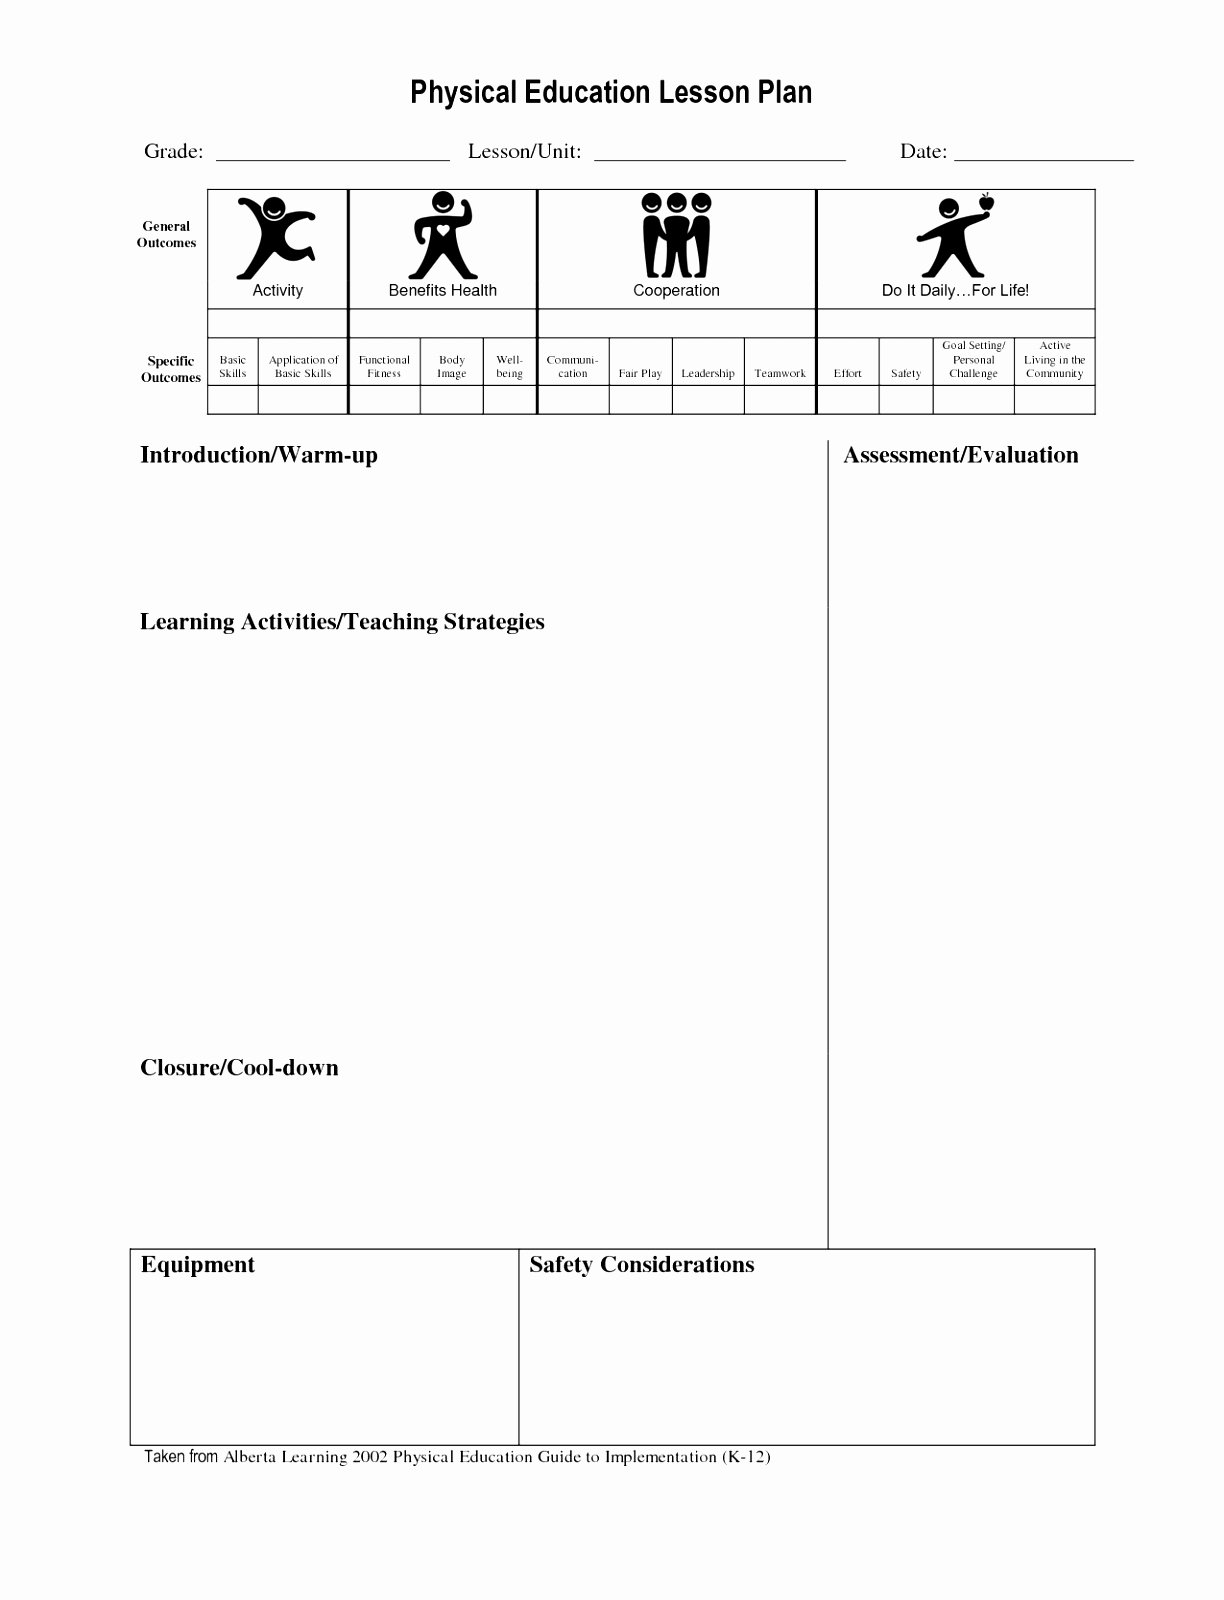 Pe Lesson Plan Template Awesome 10 Lesson Plan Template for Physical Education Eipot